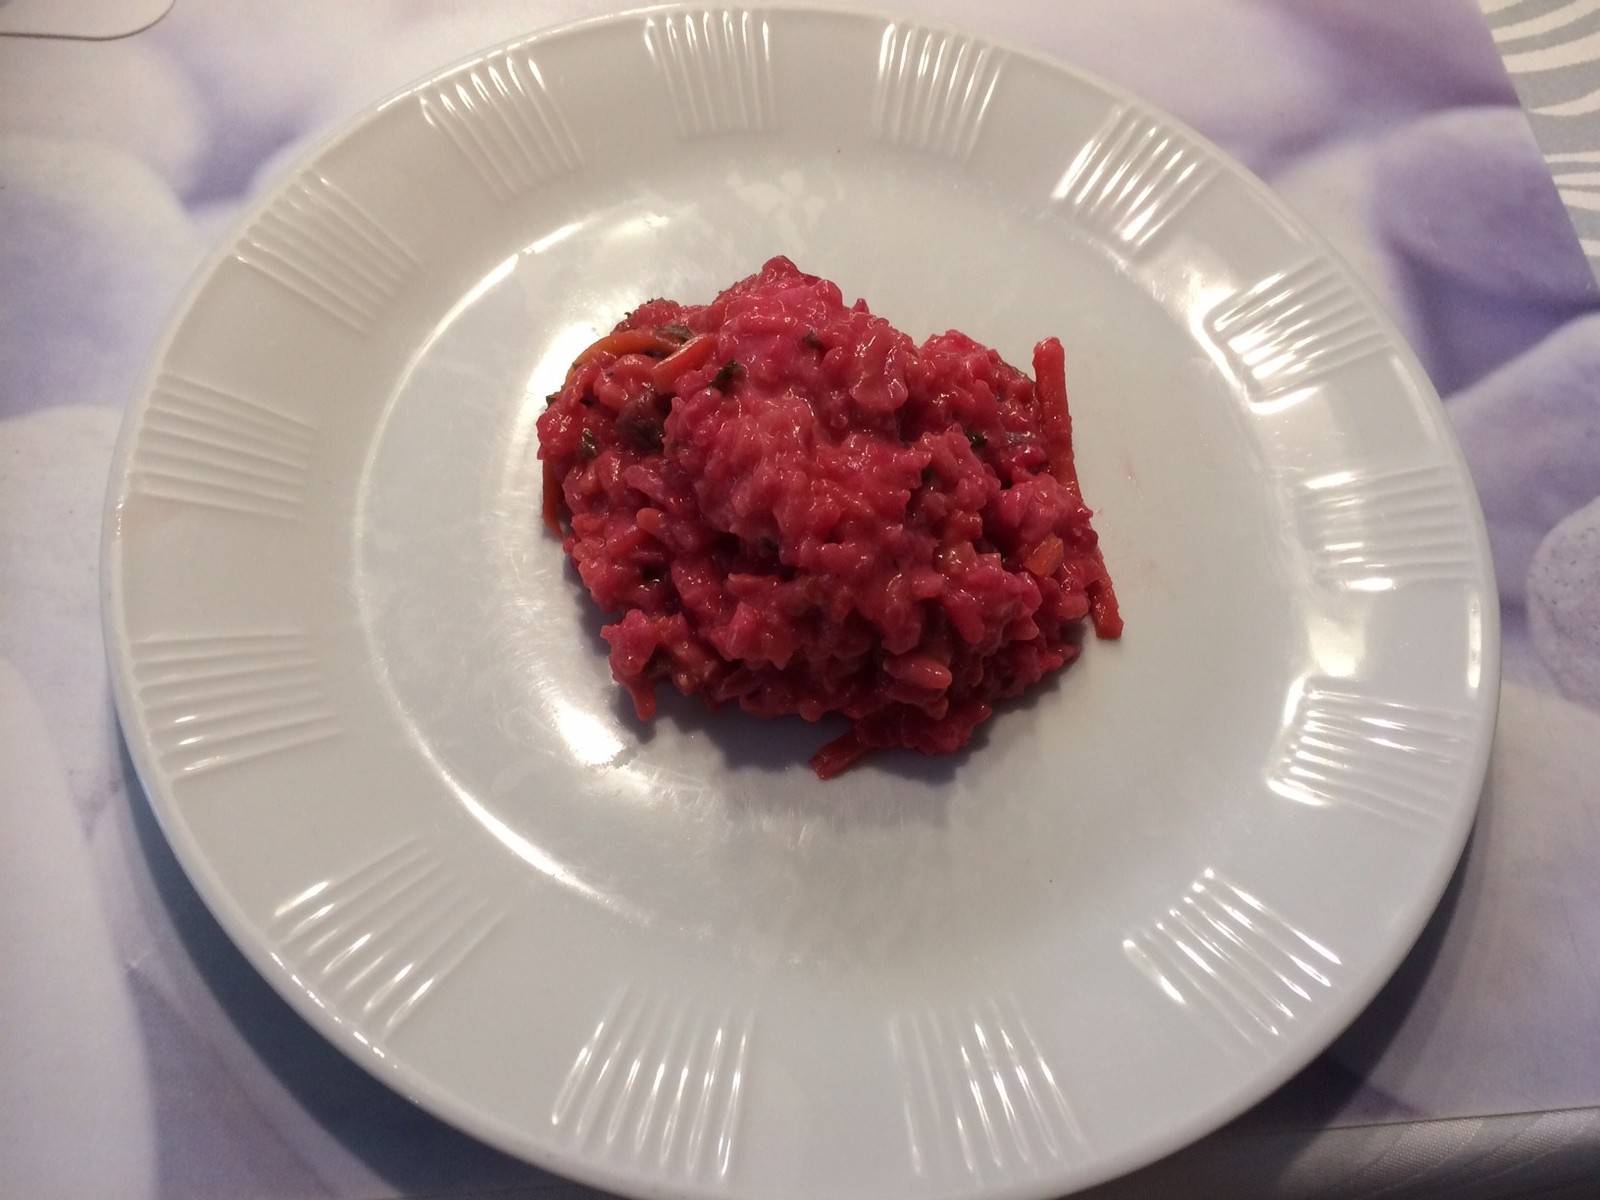 Cremiges Rote Rüben-Risotto